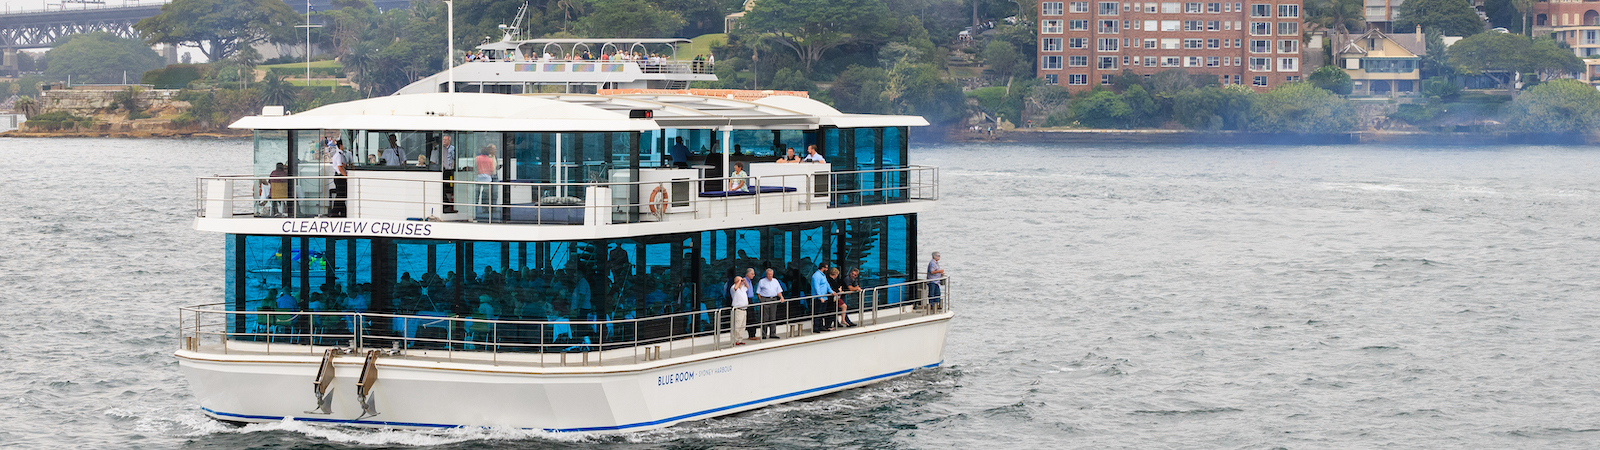 Blue Room Boat Hire Private Party Boat Hire Sydney Harbour